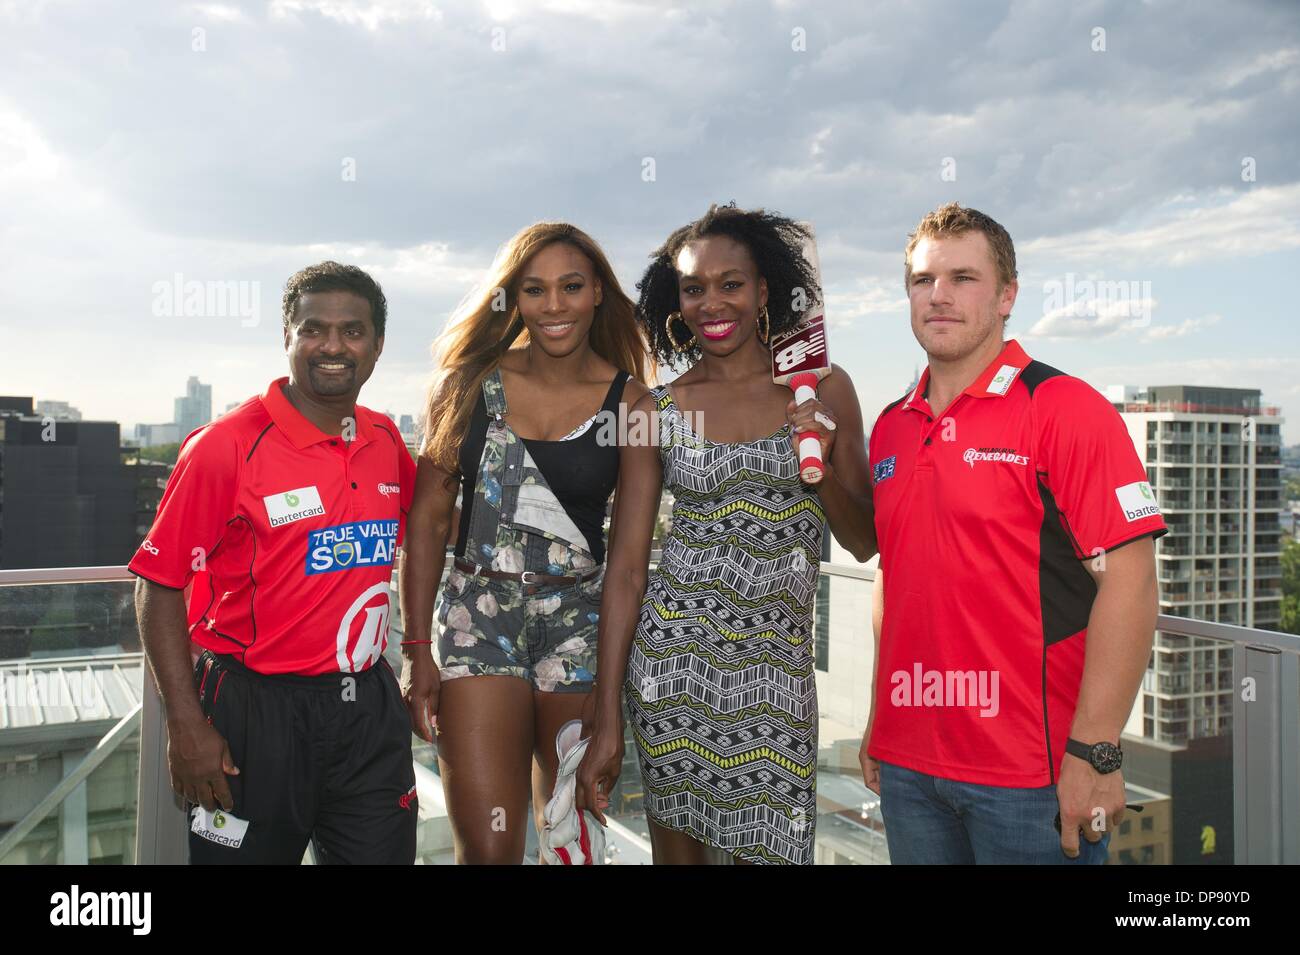 Melbourne, Australia. 9th Jan, 2014. Venus Williams (2nd, R) and Serena Williams (2nd, L) of the United States pose for photos with Melbourne Renegades players Muthiah Muralidaran (1st, L) and Aaron Finch during a media event ahead of 2014 Australian Open in Melbourne, Australia, Jan. 9, 2014. Credit:  Bai Xue/Xinhua/Alamy Live News Stock Photo